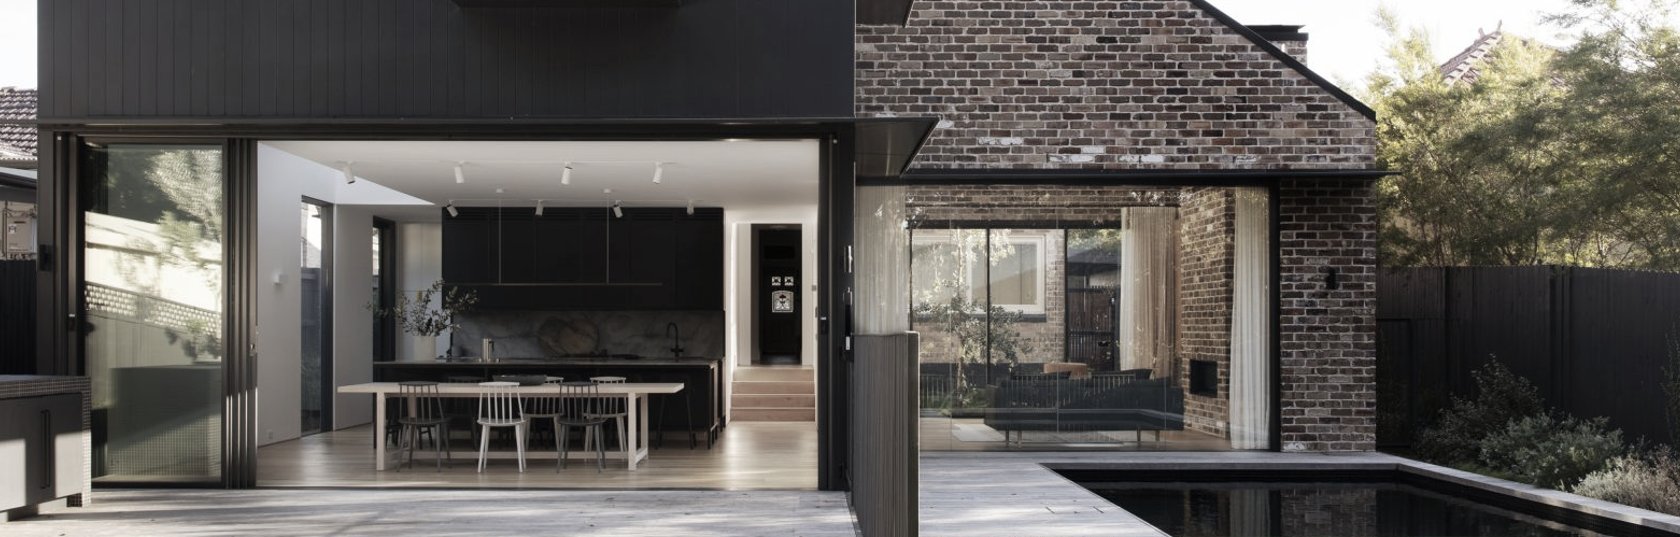 Hidden extension allows heritage home to shine